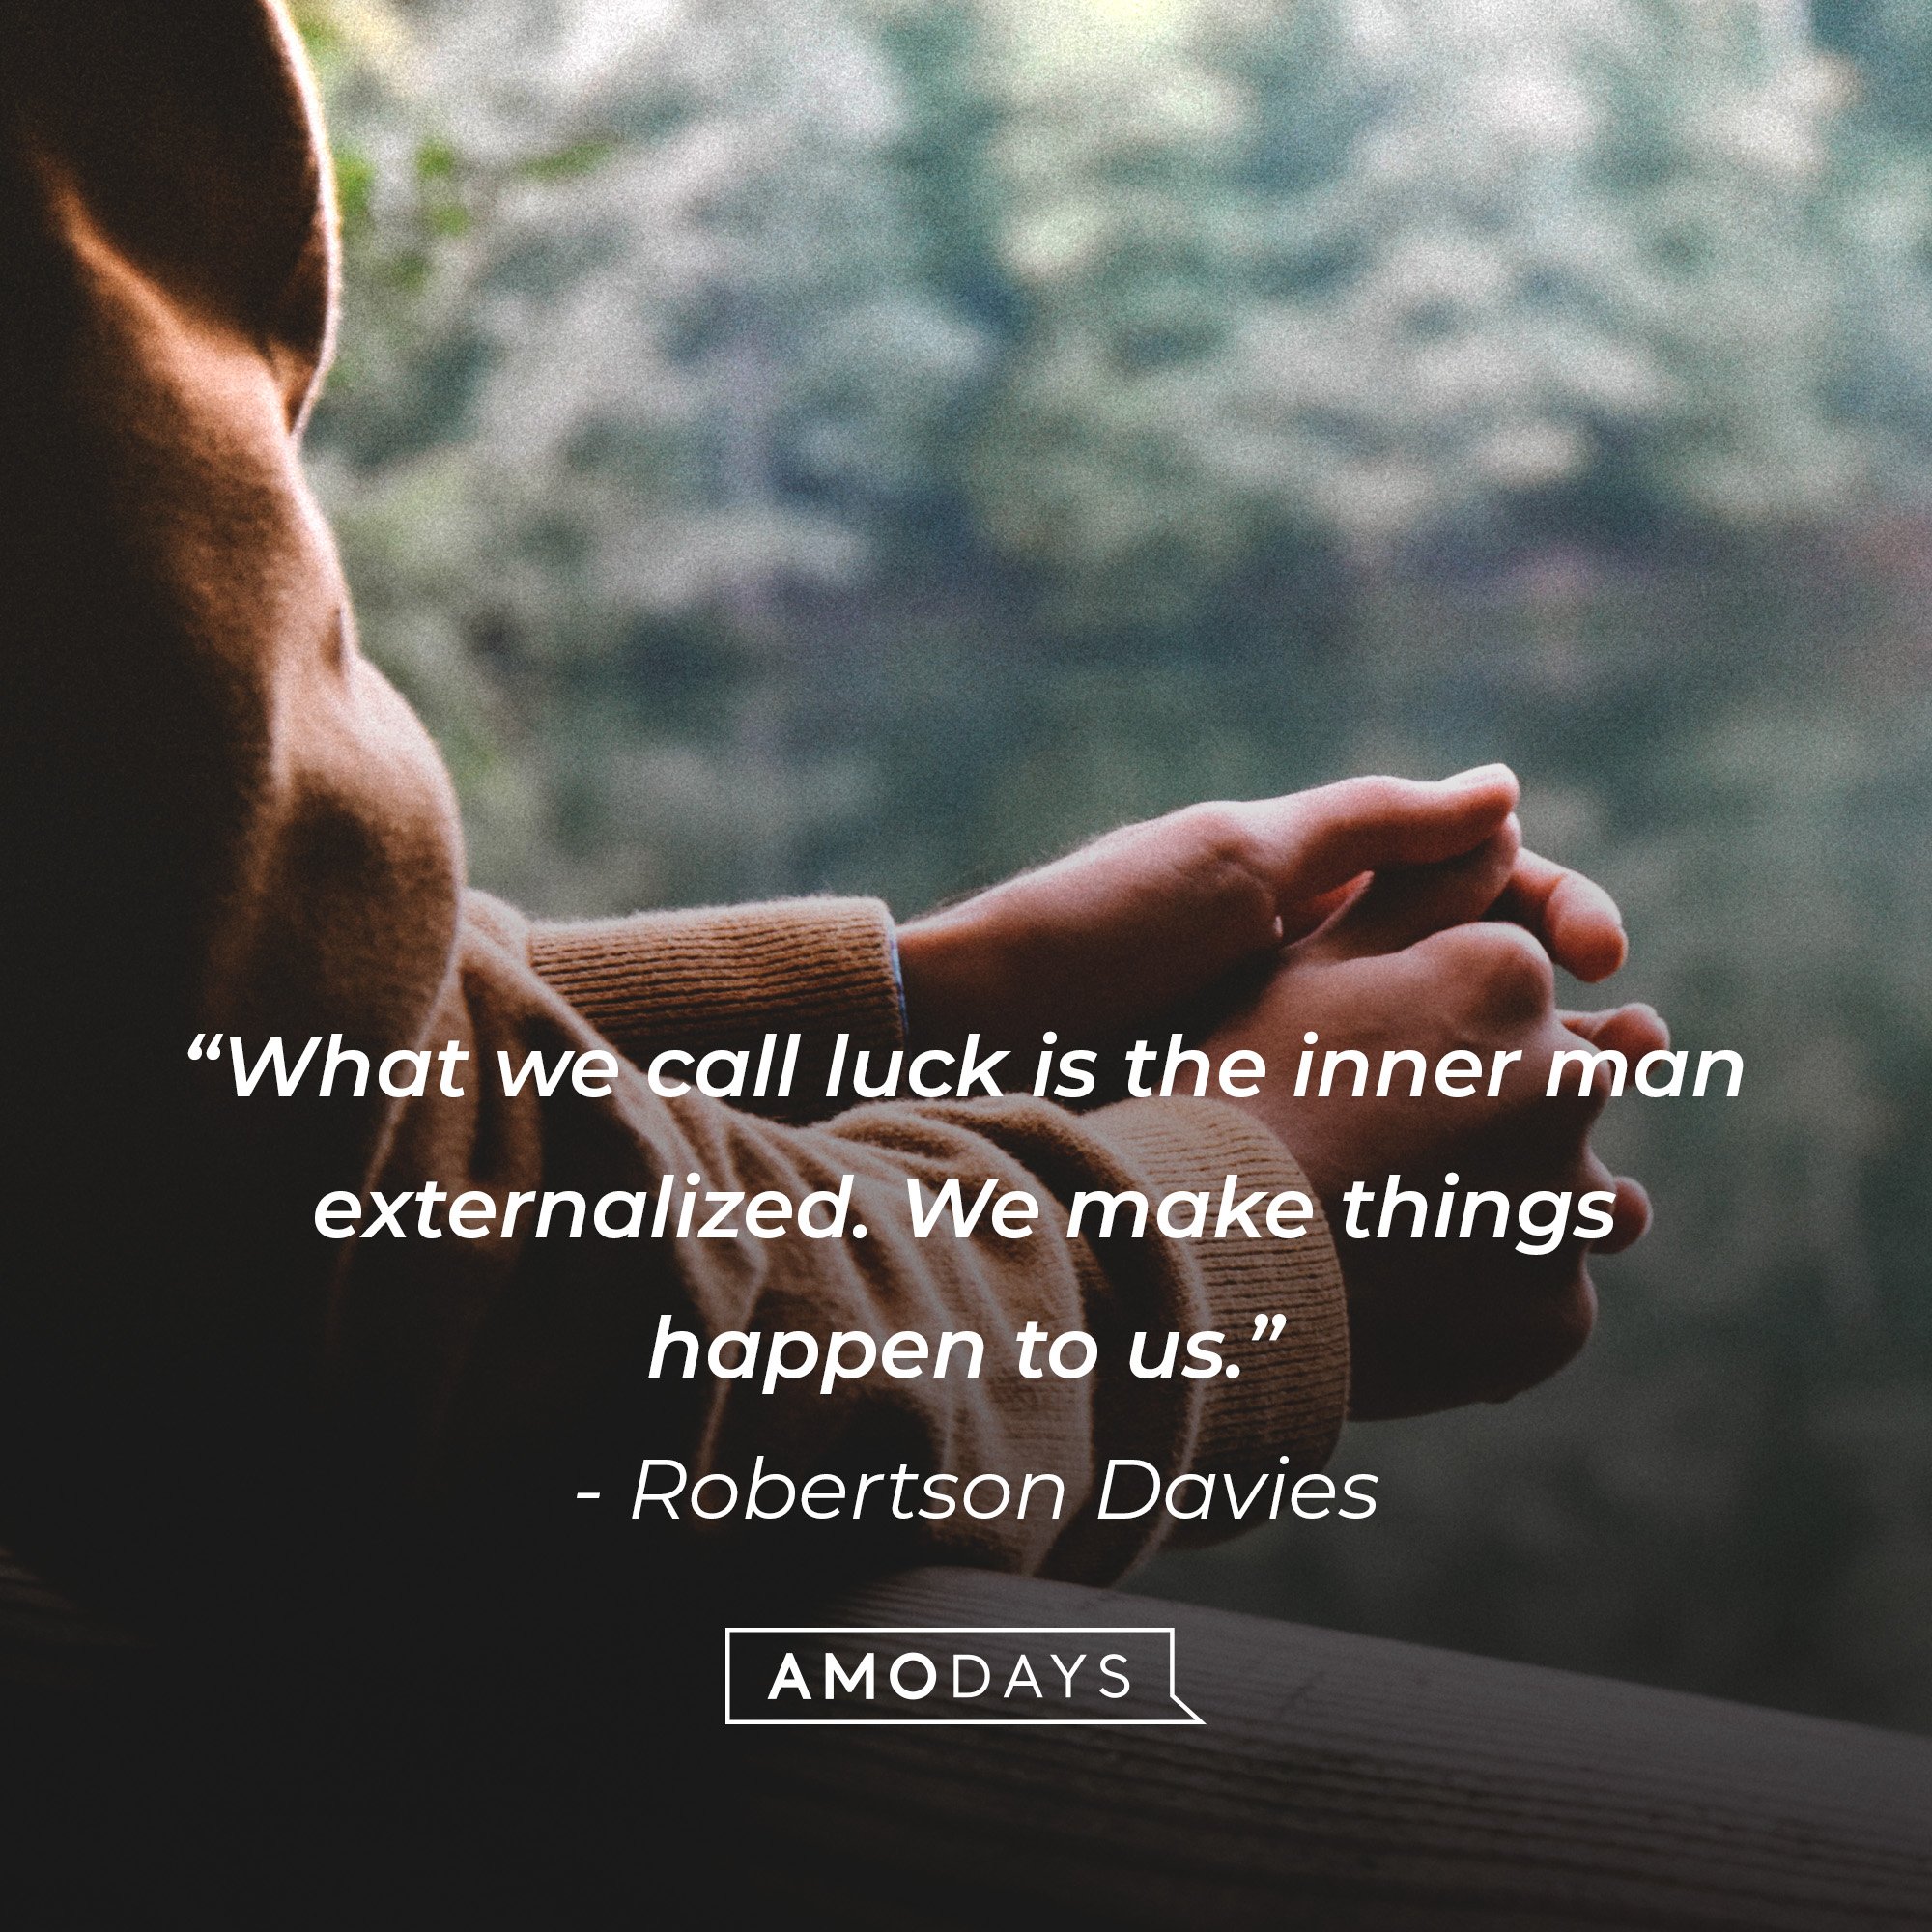 Robertson Davies's quote: “What we call luck is the inner man externalized. We make things happen to us.” | Image: AmoDays